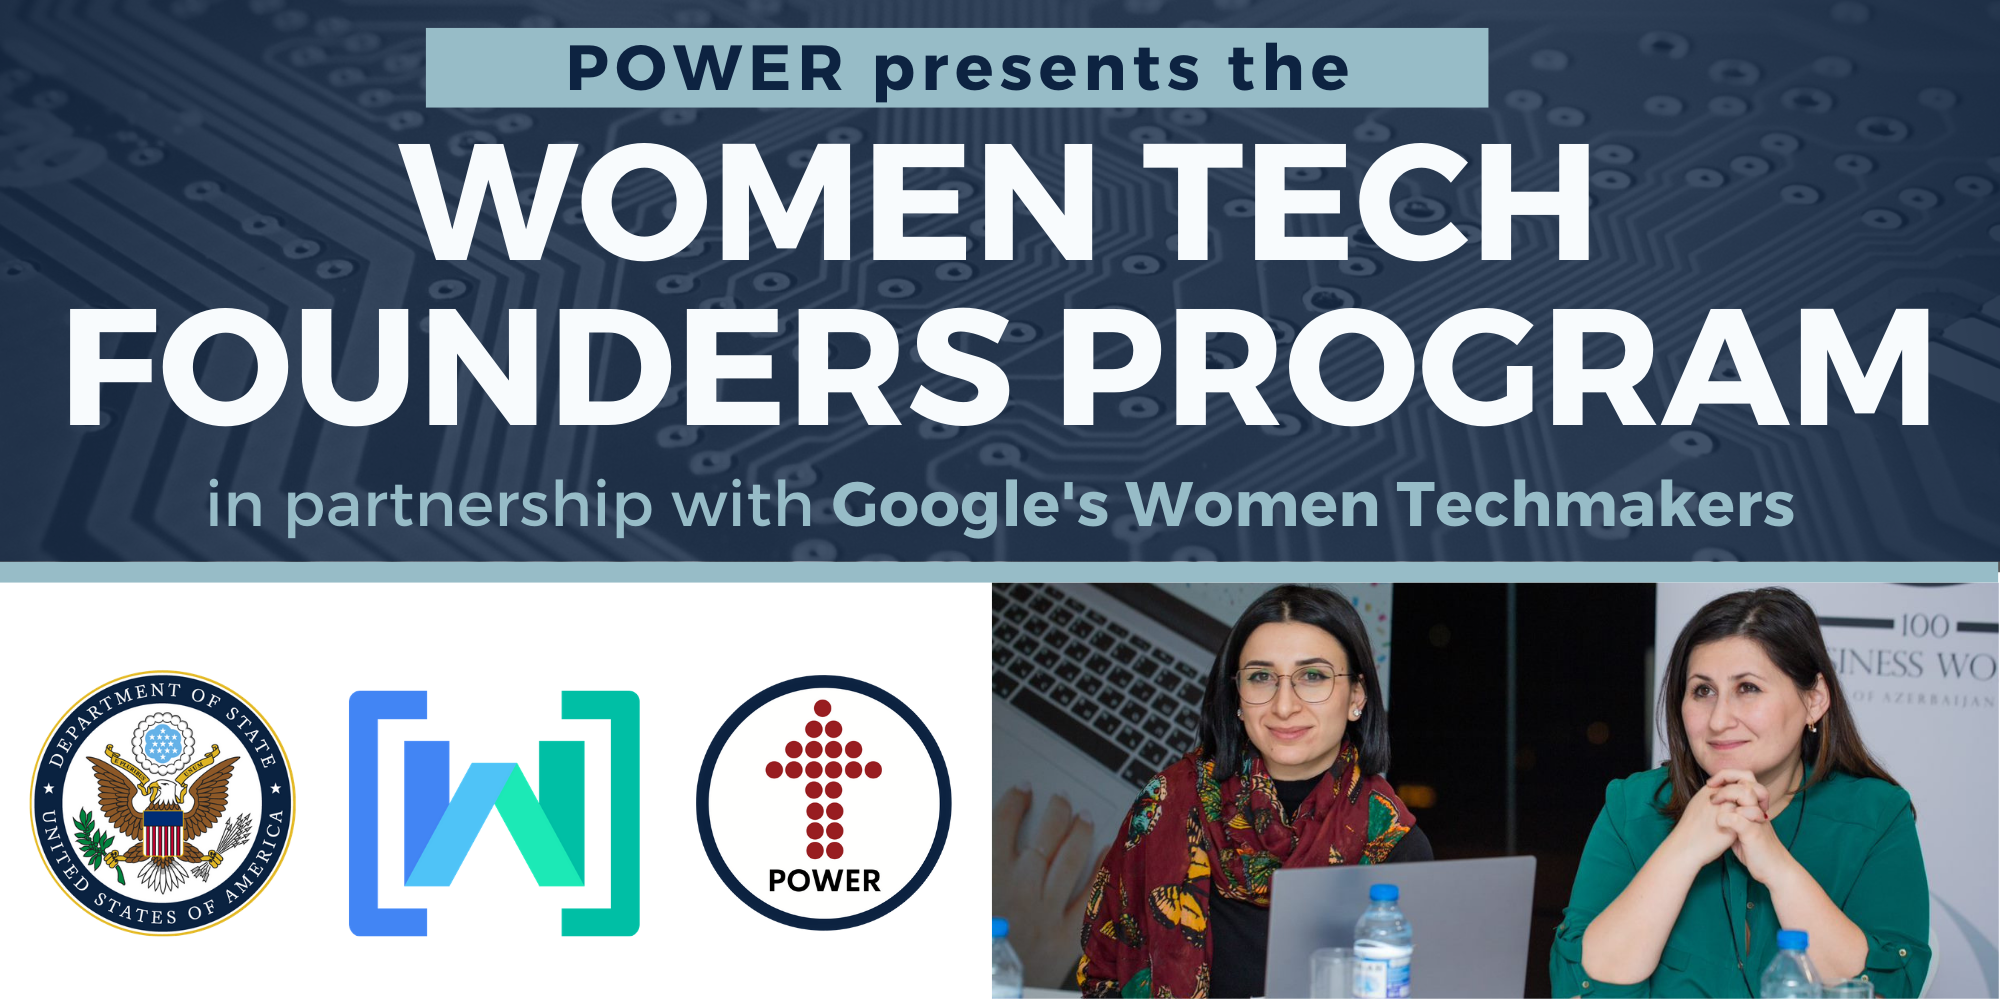 Graphic with the text "POWER presents the Women Tech Founders Program, in partnership with Google's Women Techmakers"; logos for the Department of State, Women Techmakers, and POWER; and a photo of two women at a laptop.